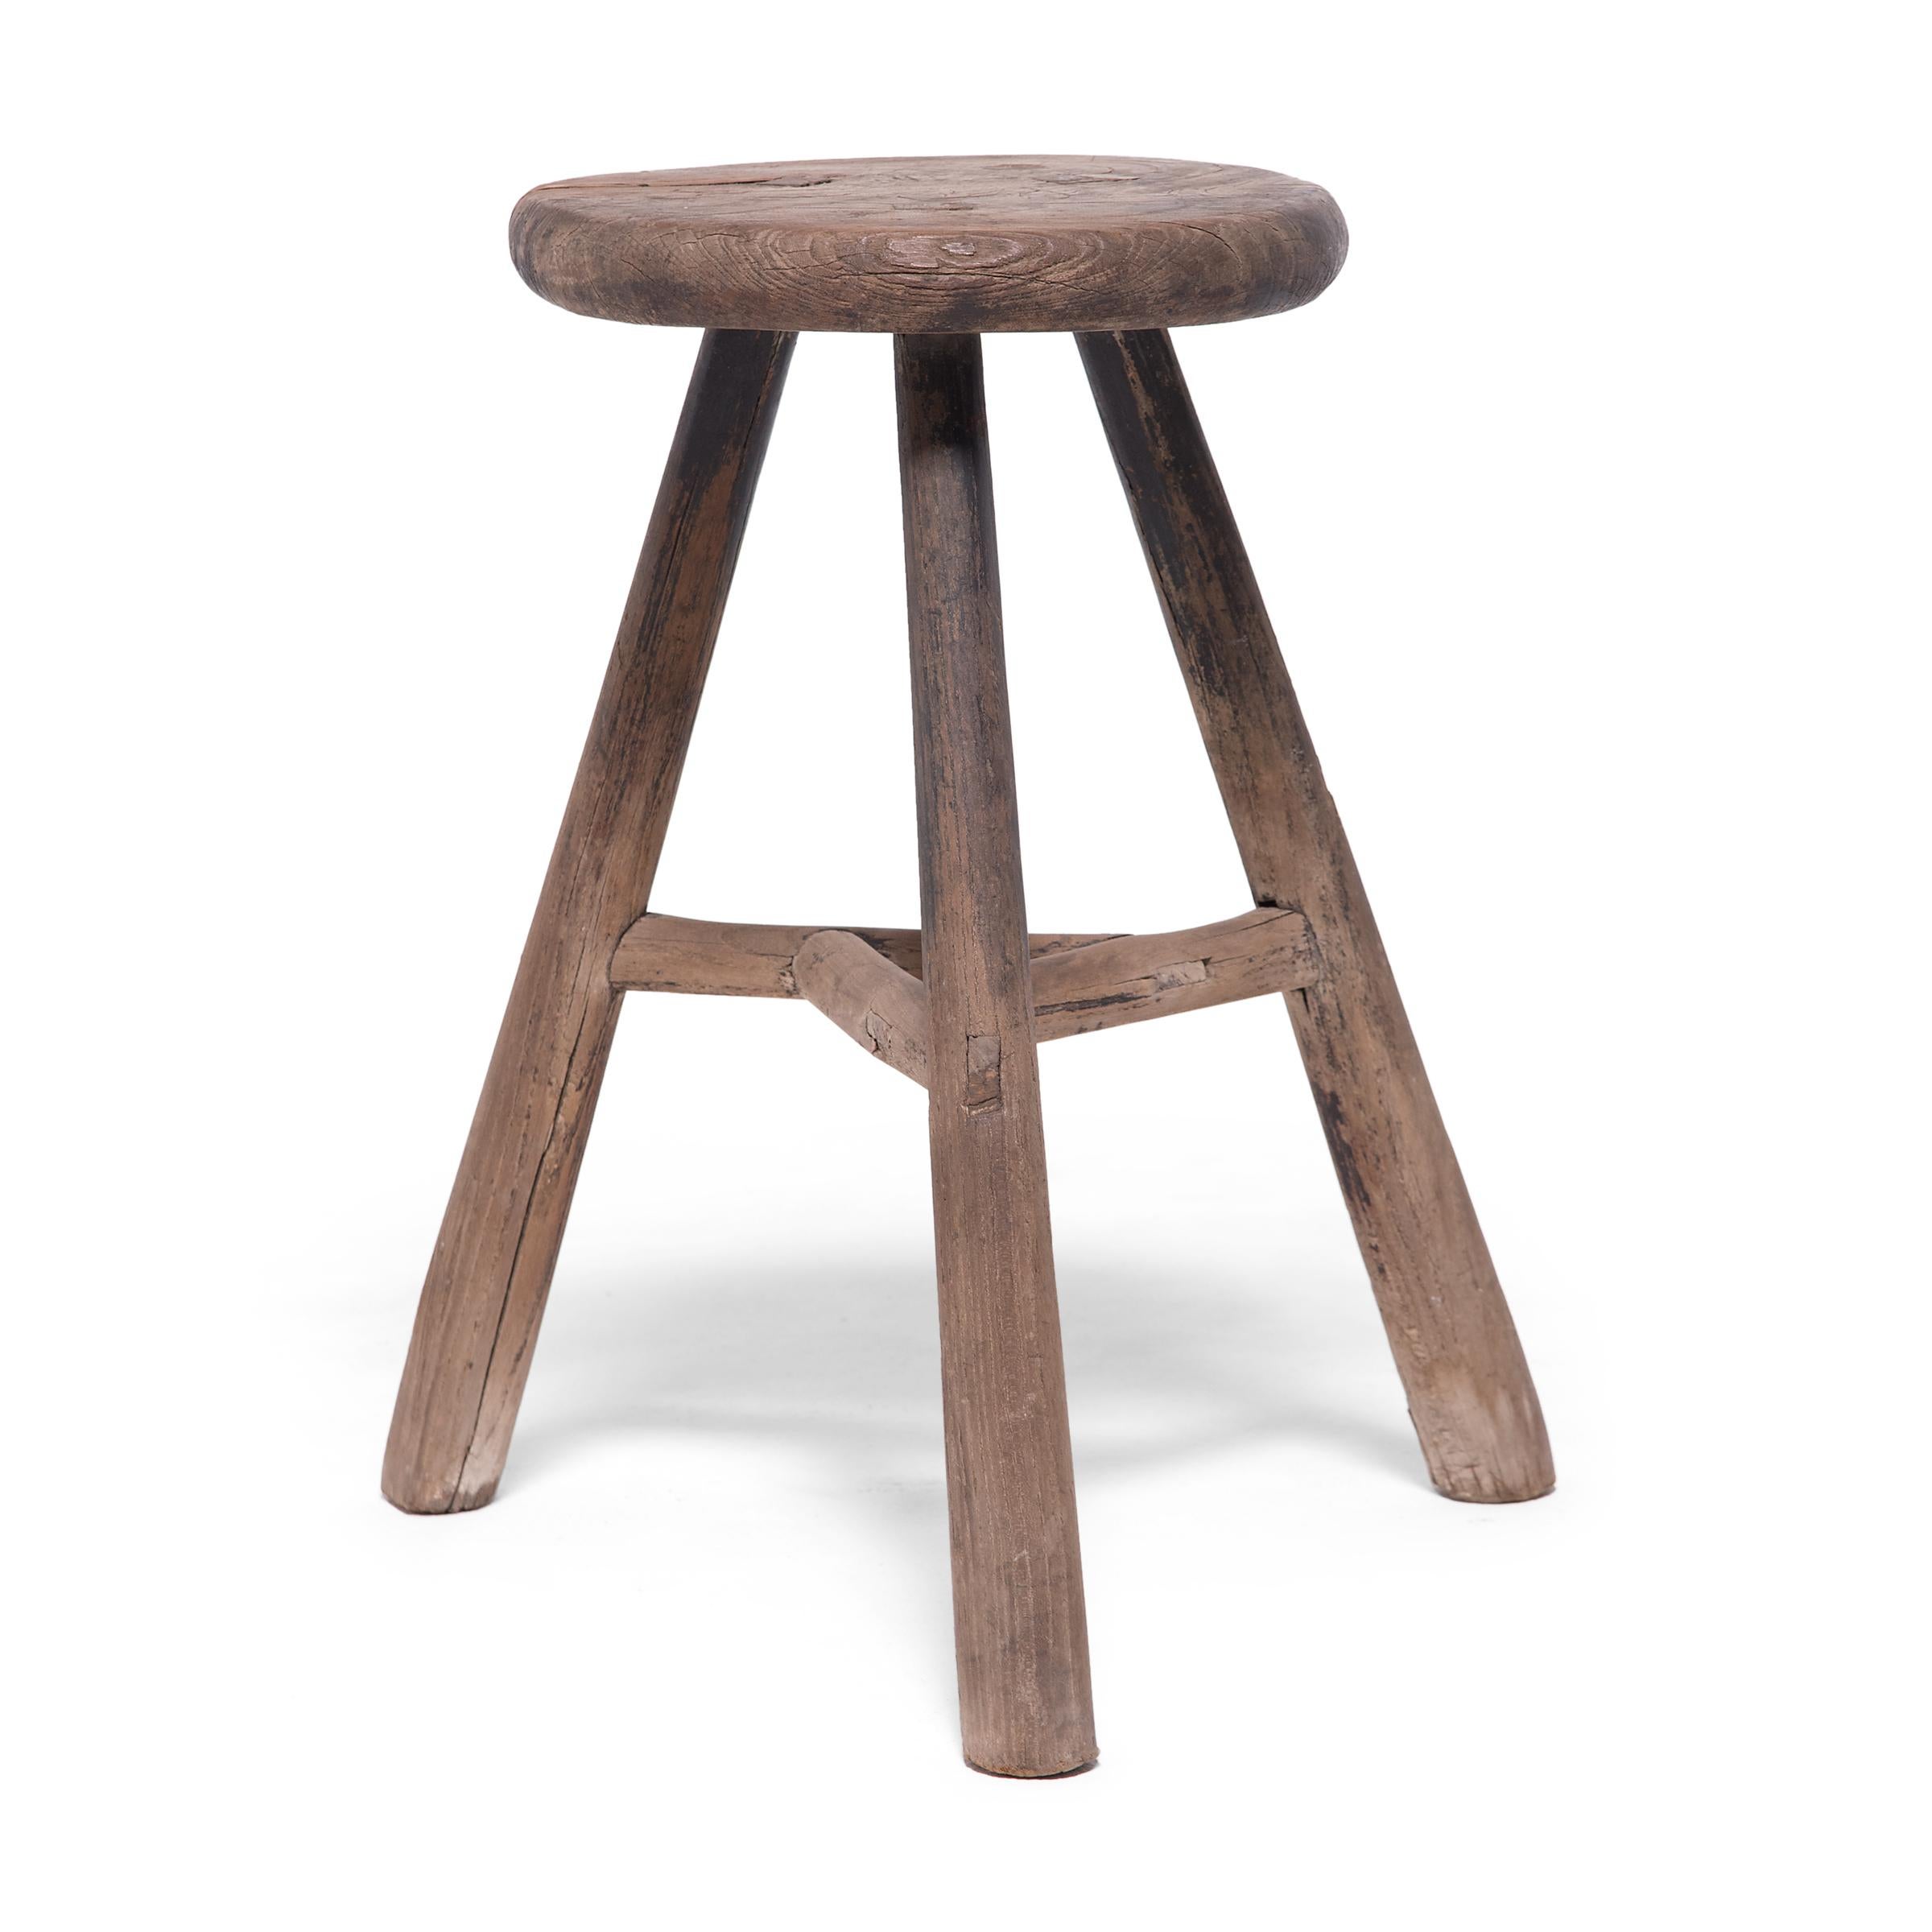 Deceptively simple, this rustic stool from the early 20th century shows off the ingenious joinery methods traditionally used by Chinese carpenters. The stool's three splayed legs are supported by stretcher bars that interlock at the center to form a